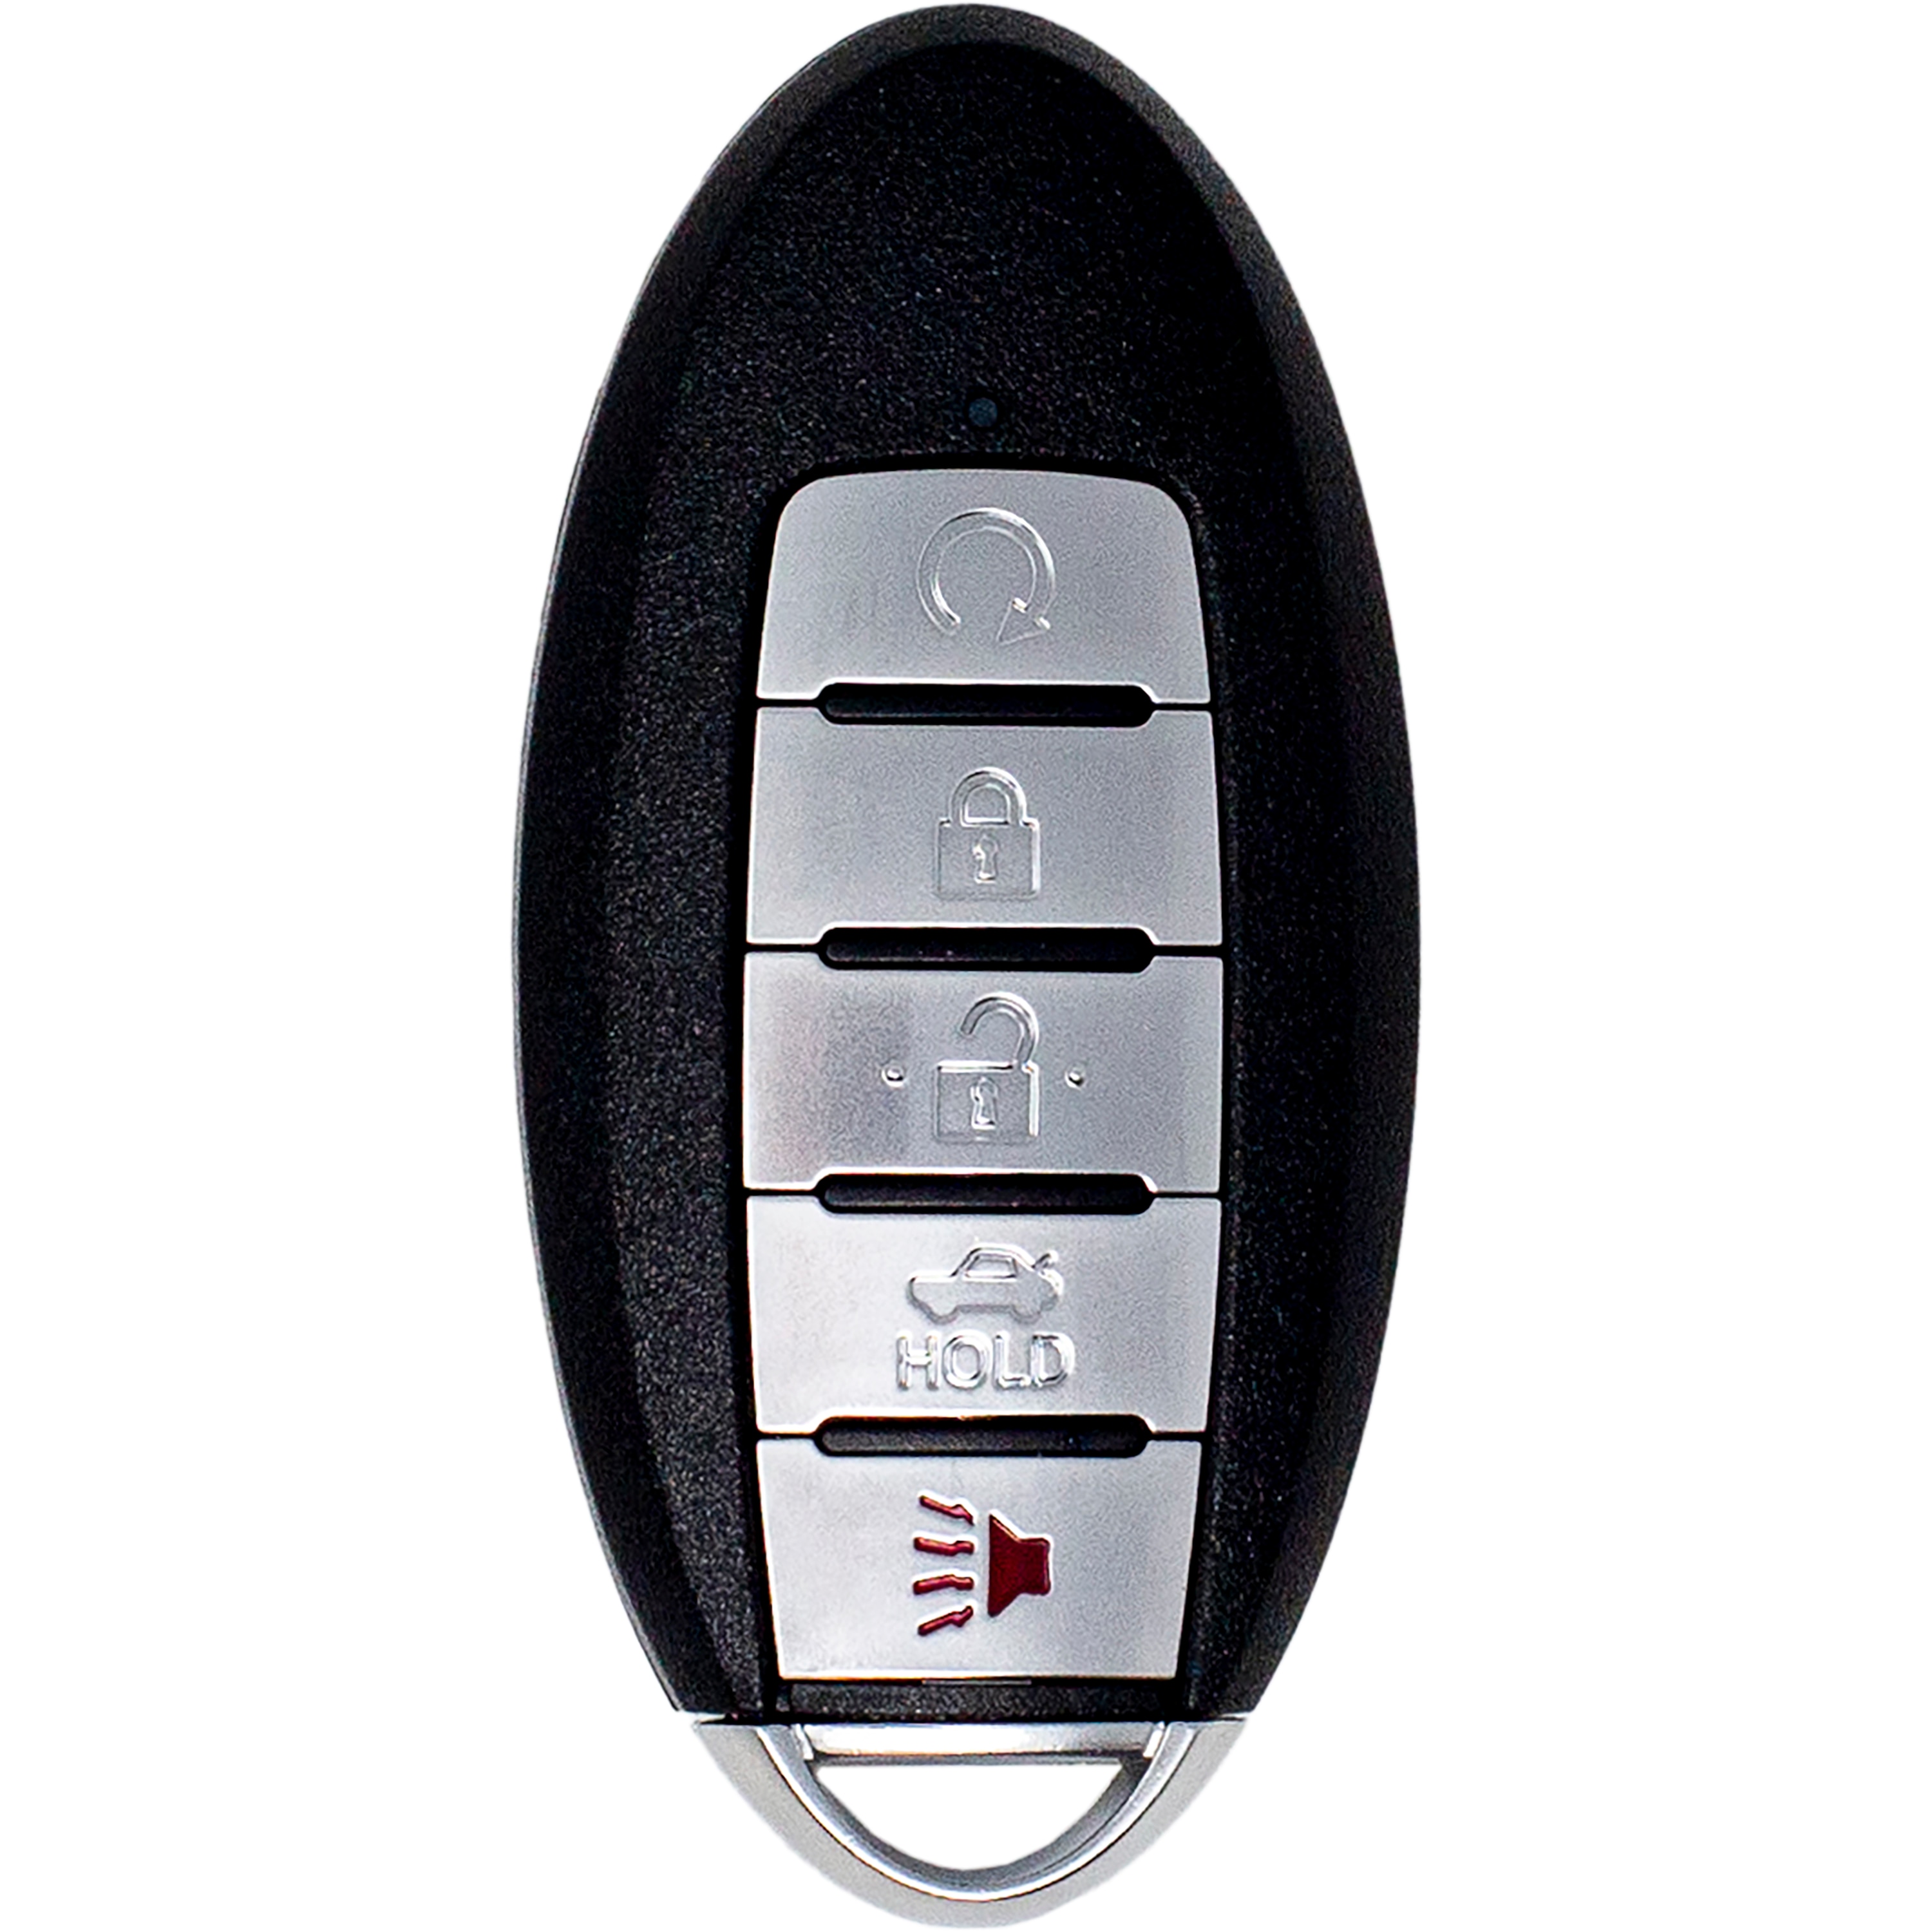 Car Keys Express Black 4 Button Remote and Key Combo with Edge Cut